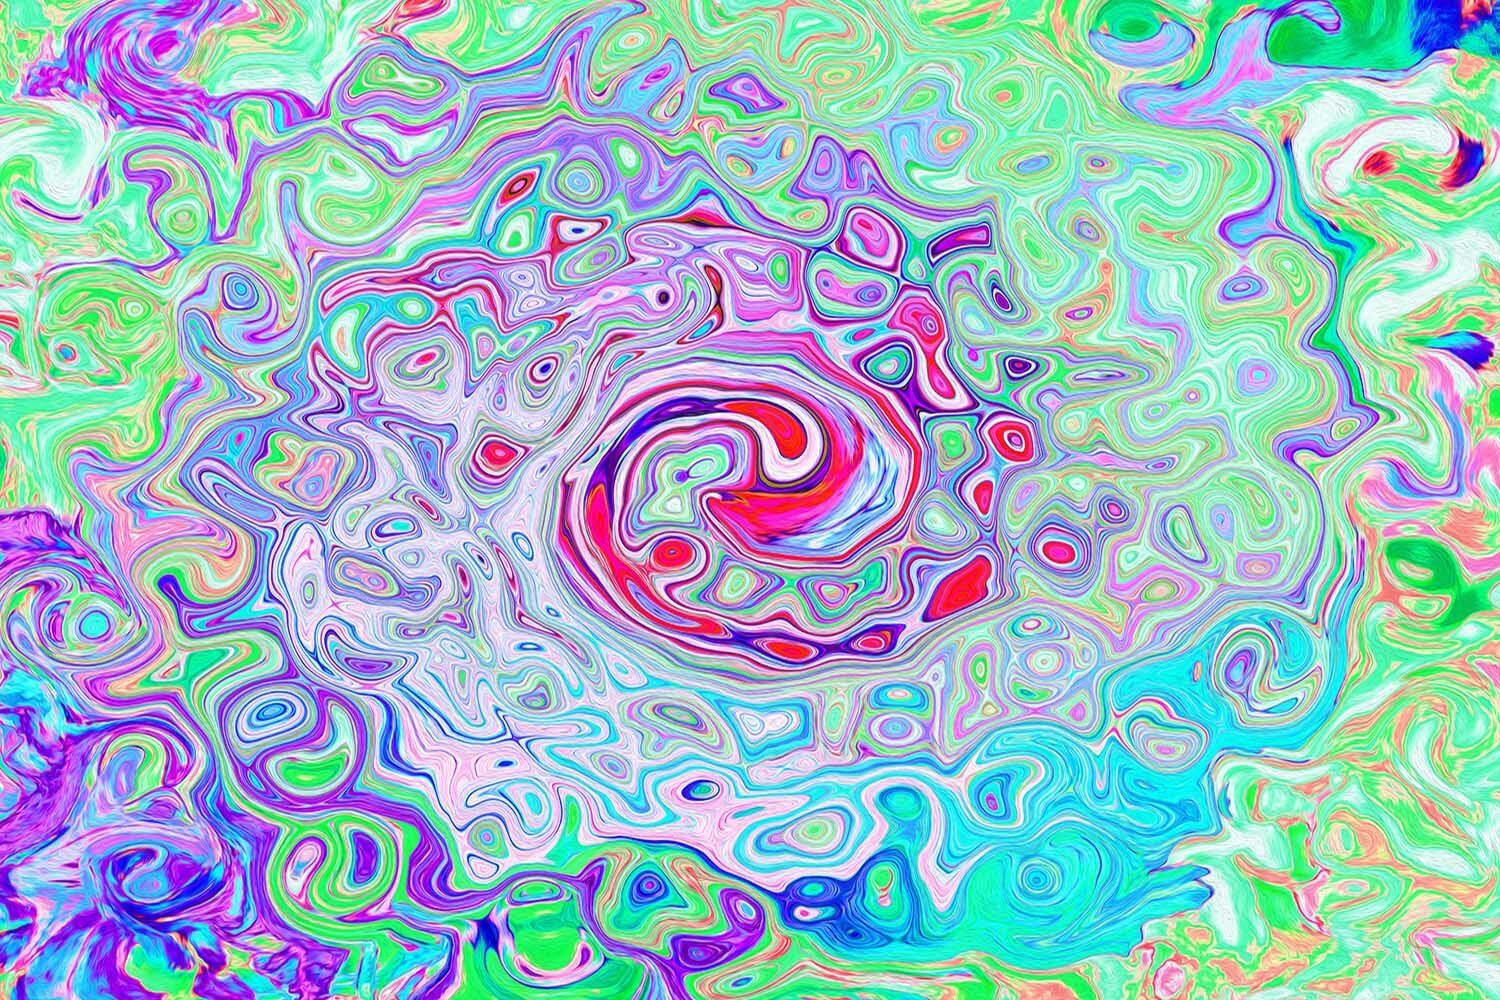 Groovy Abstract Retro Pink and Green Swirl